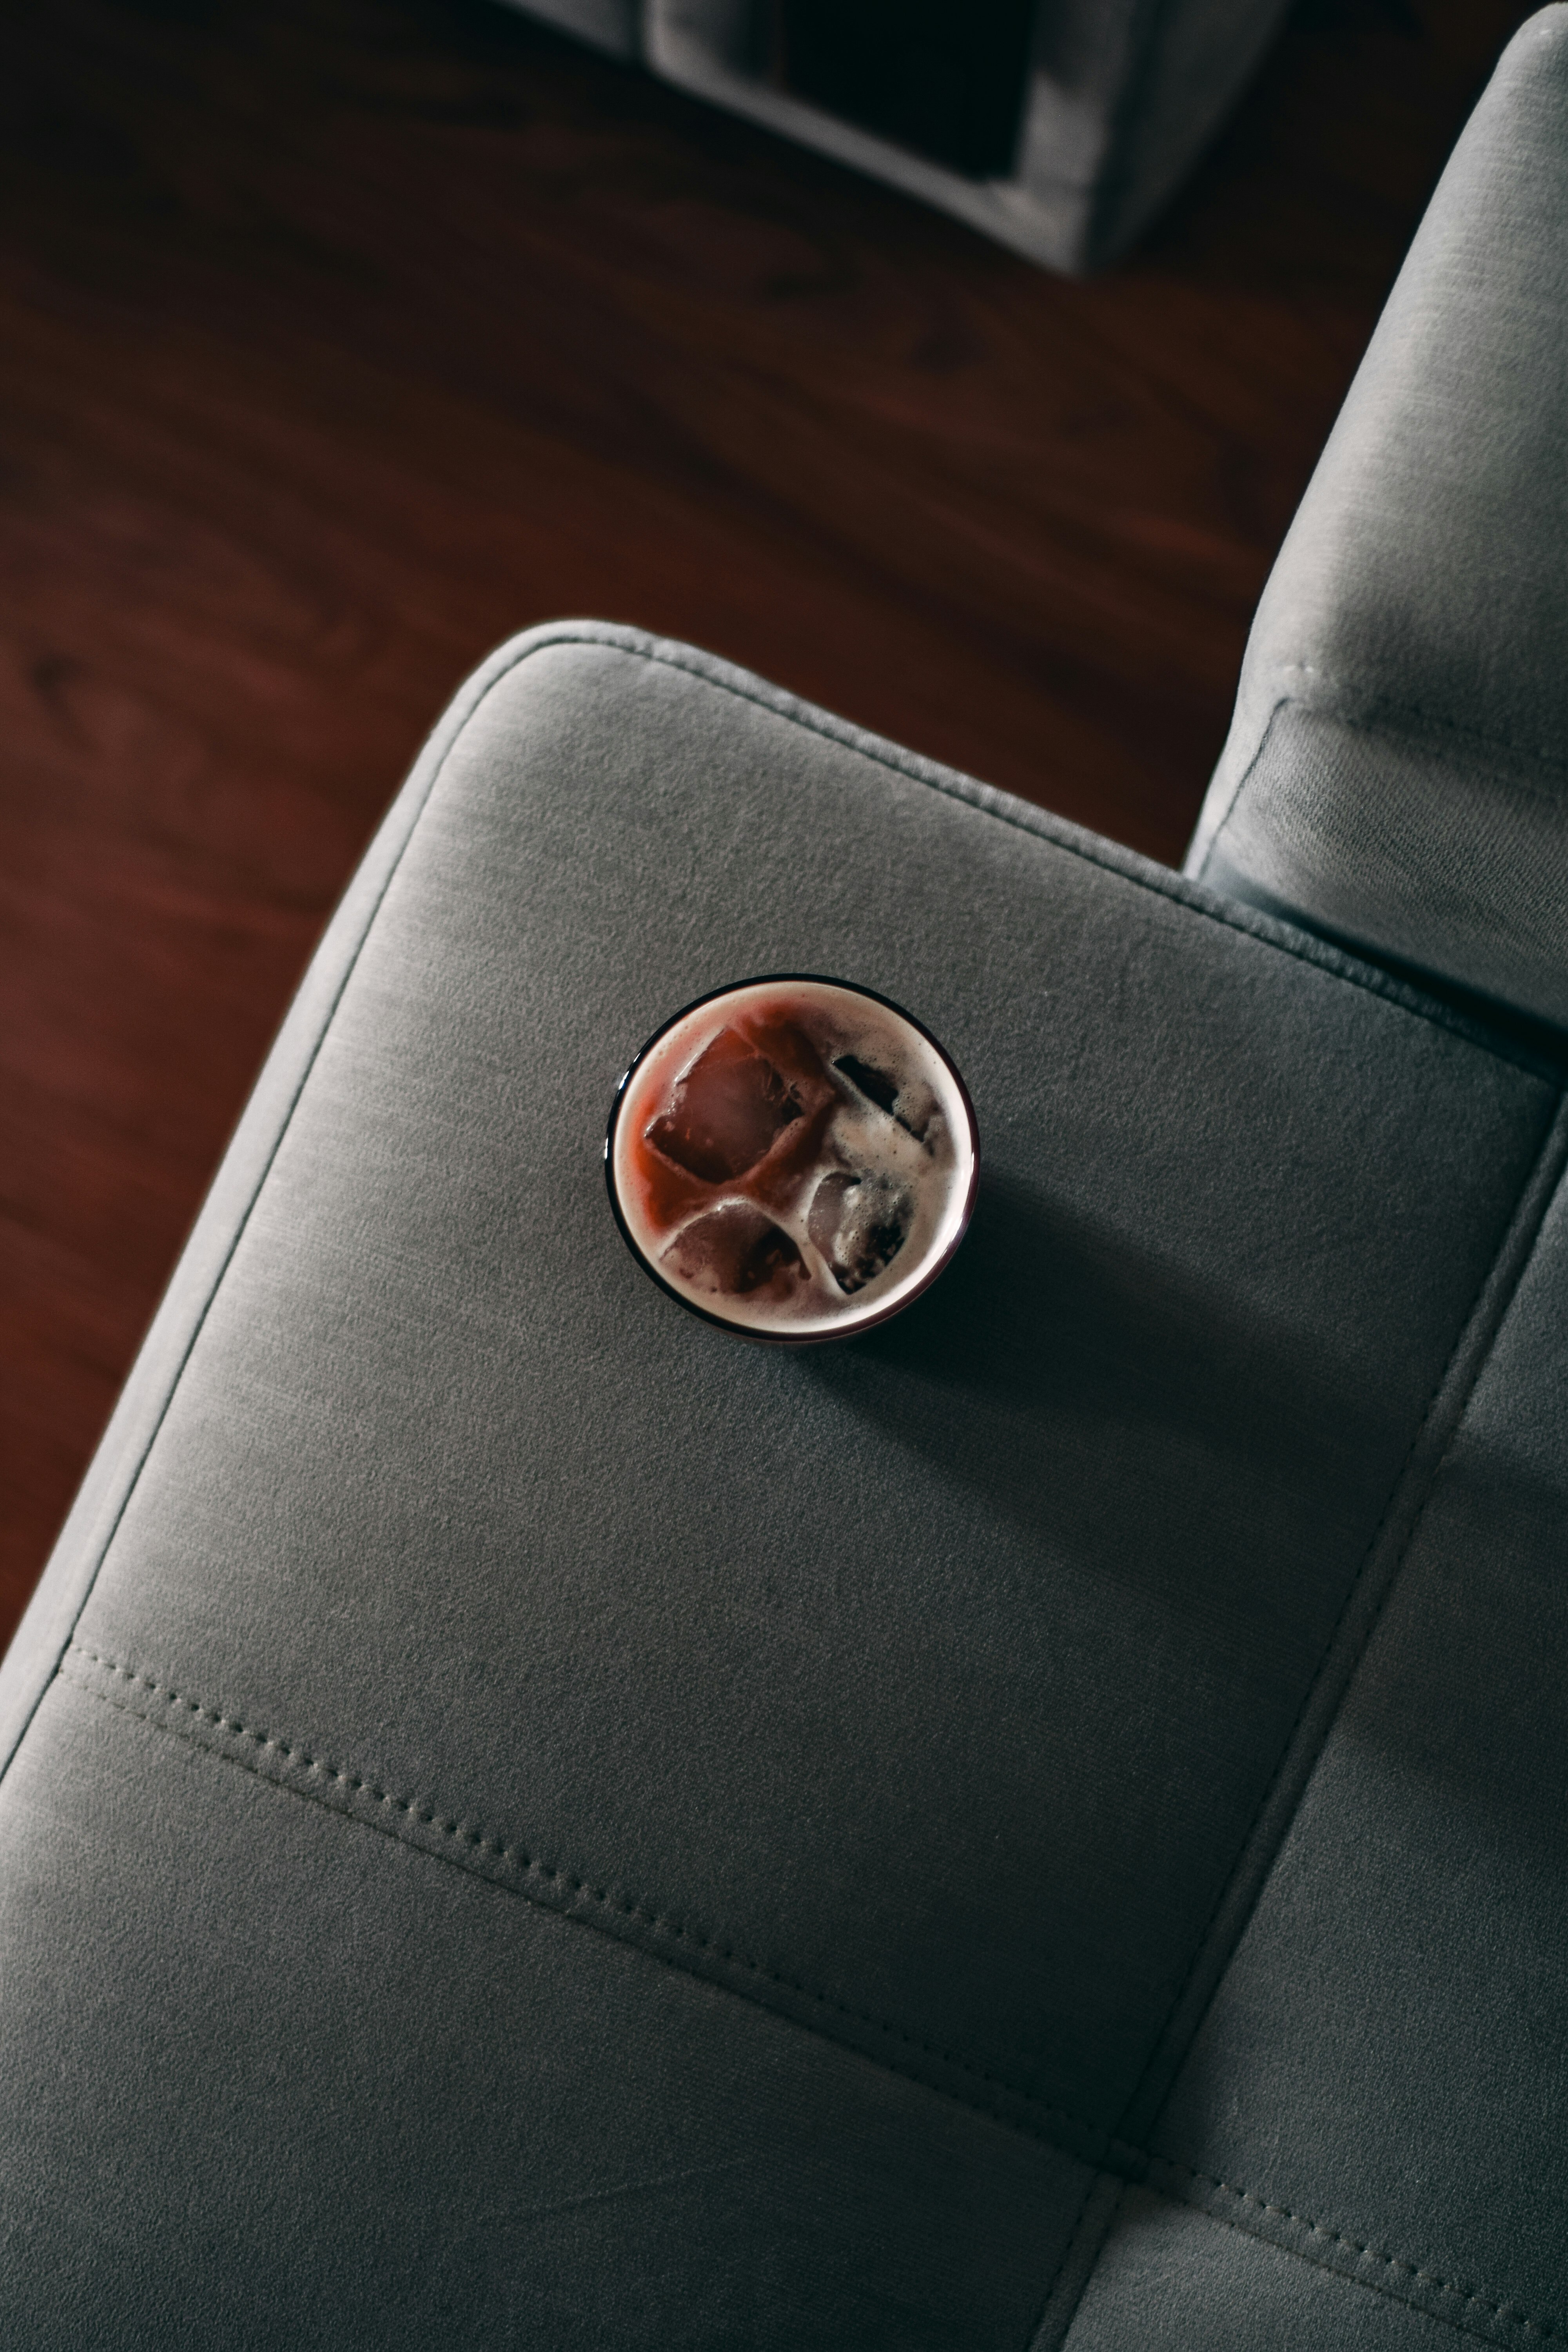 silver round coin on black leather chair